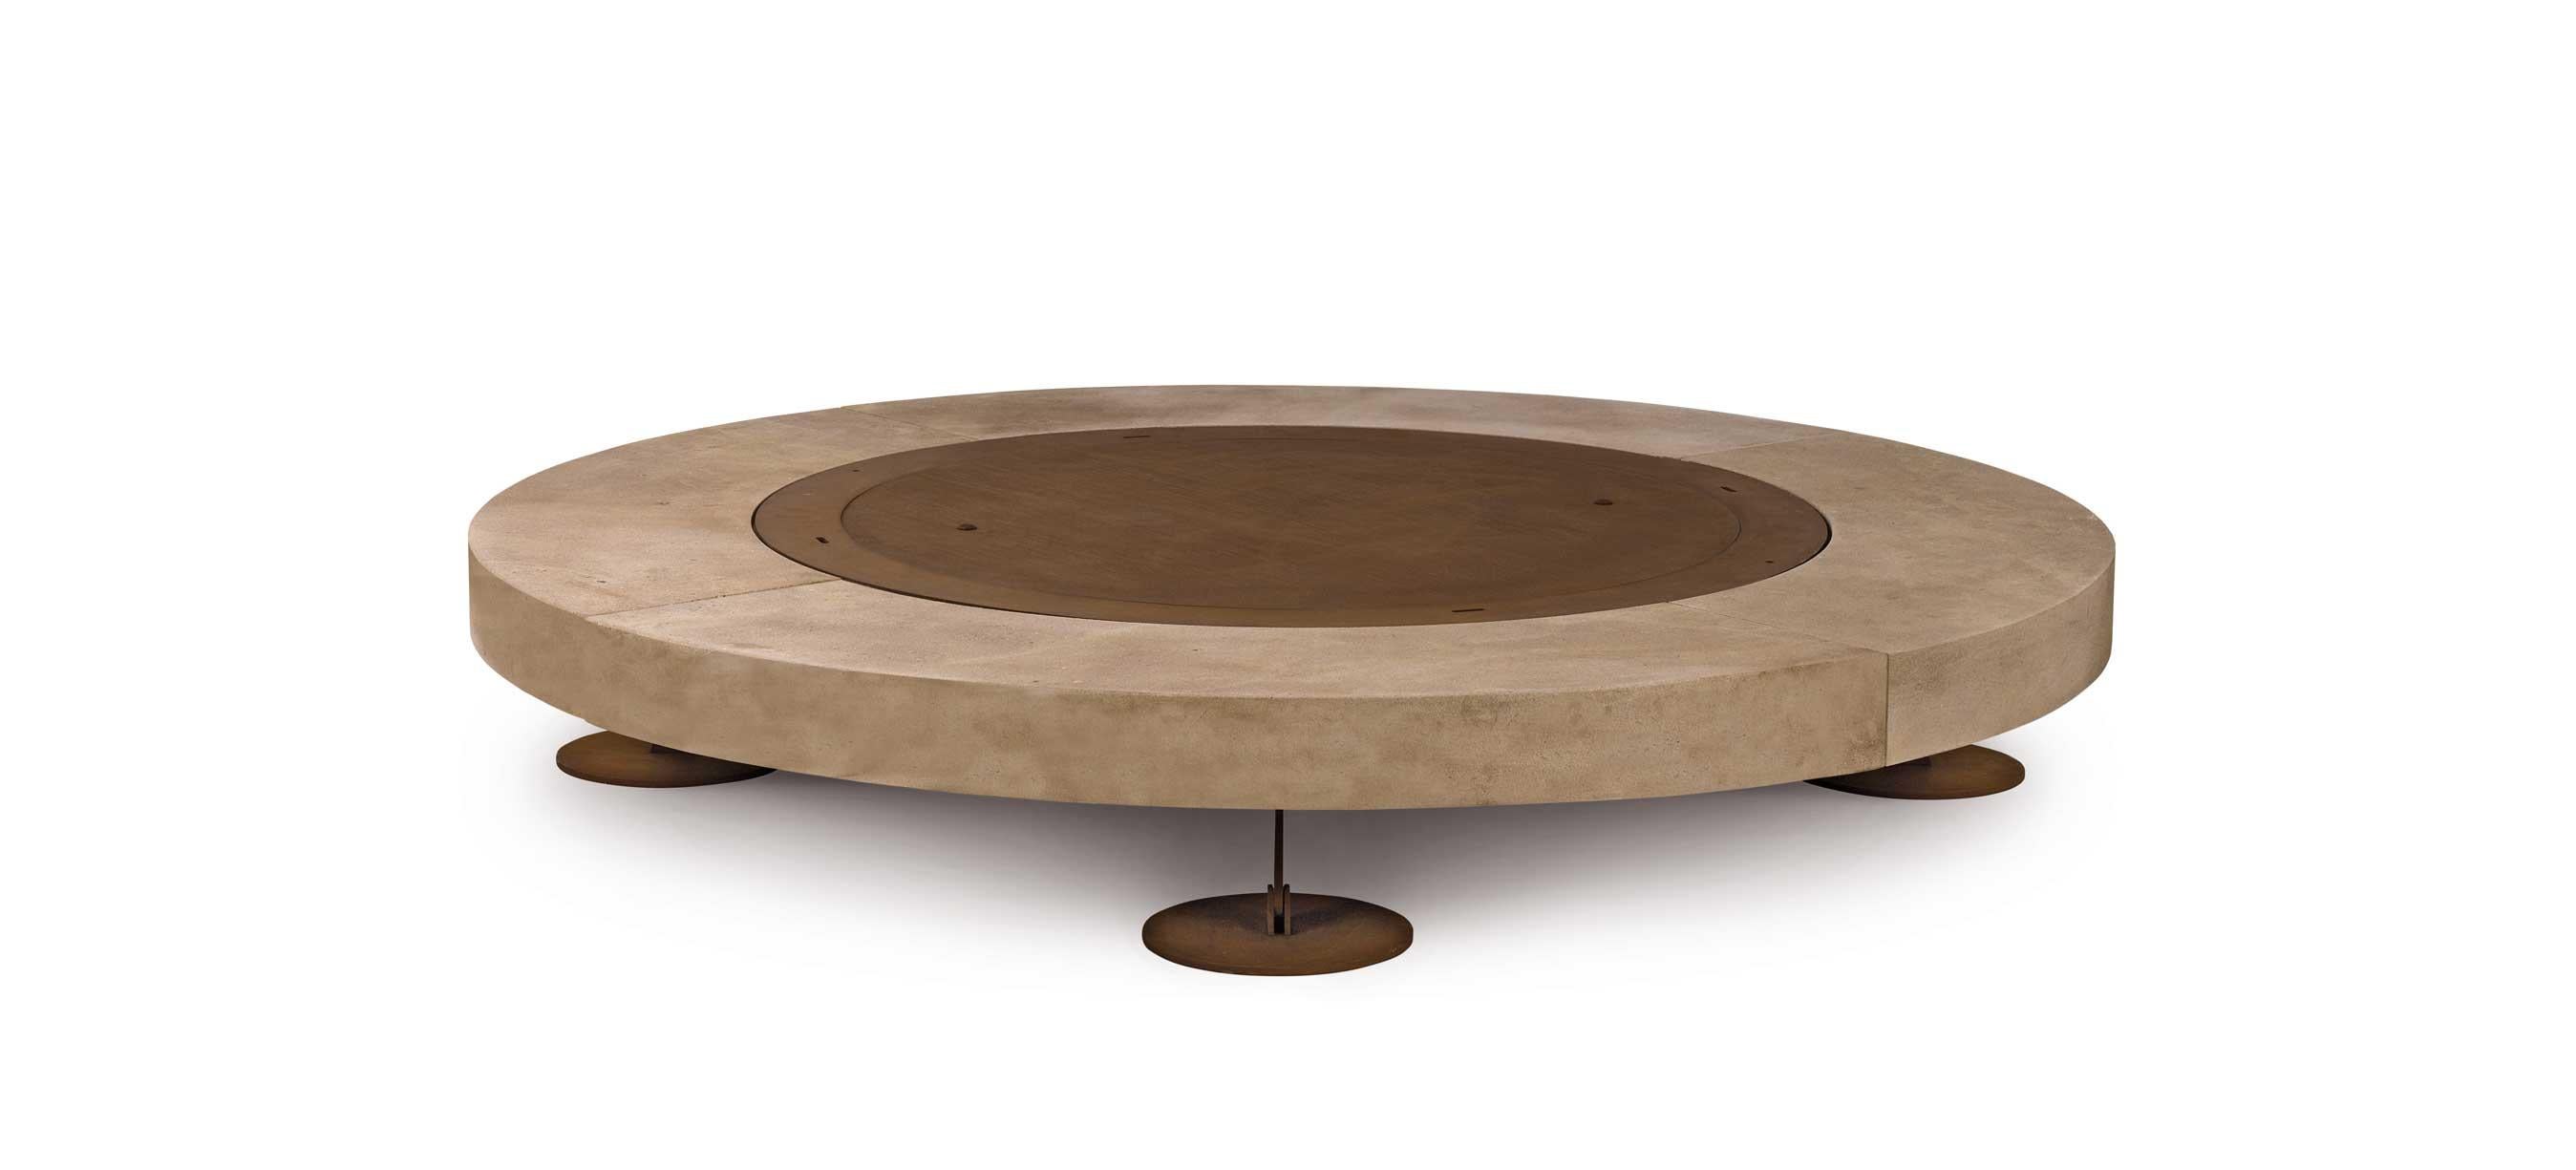 Modern Rondo Fire Pit by AK47 Design For Sale